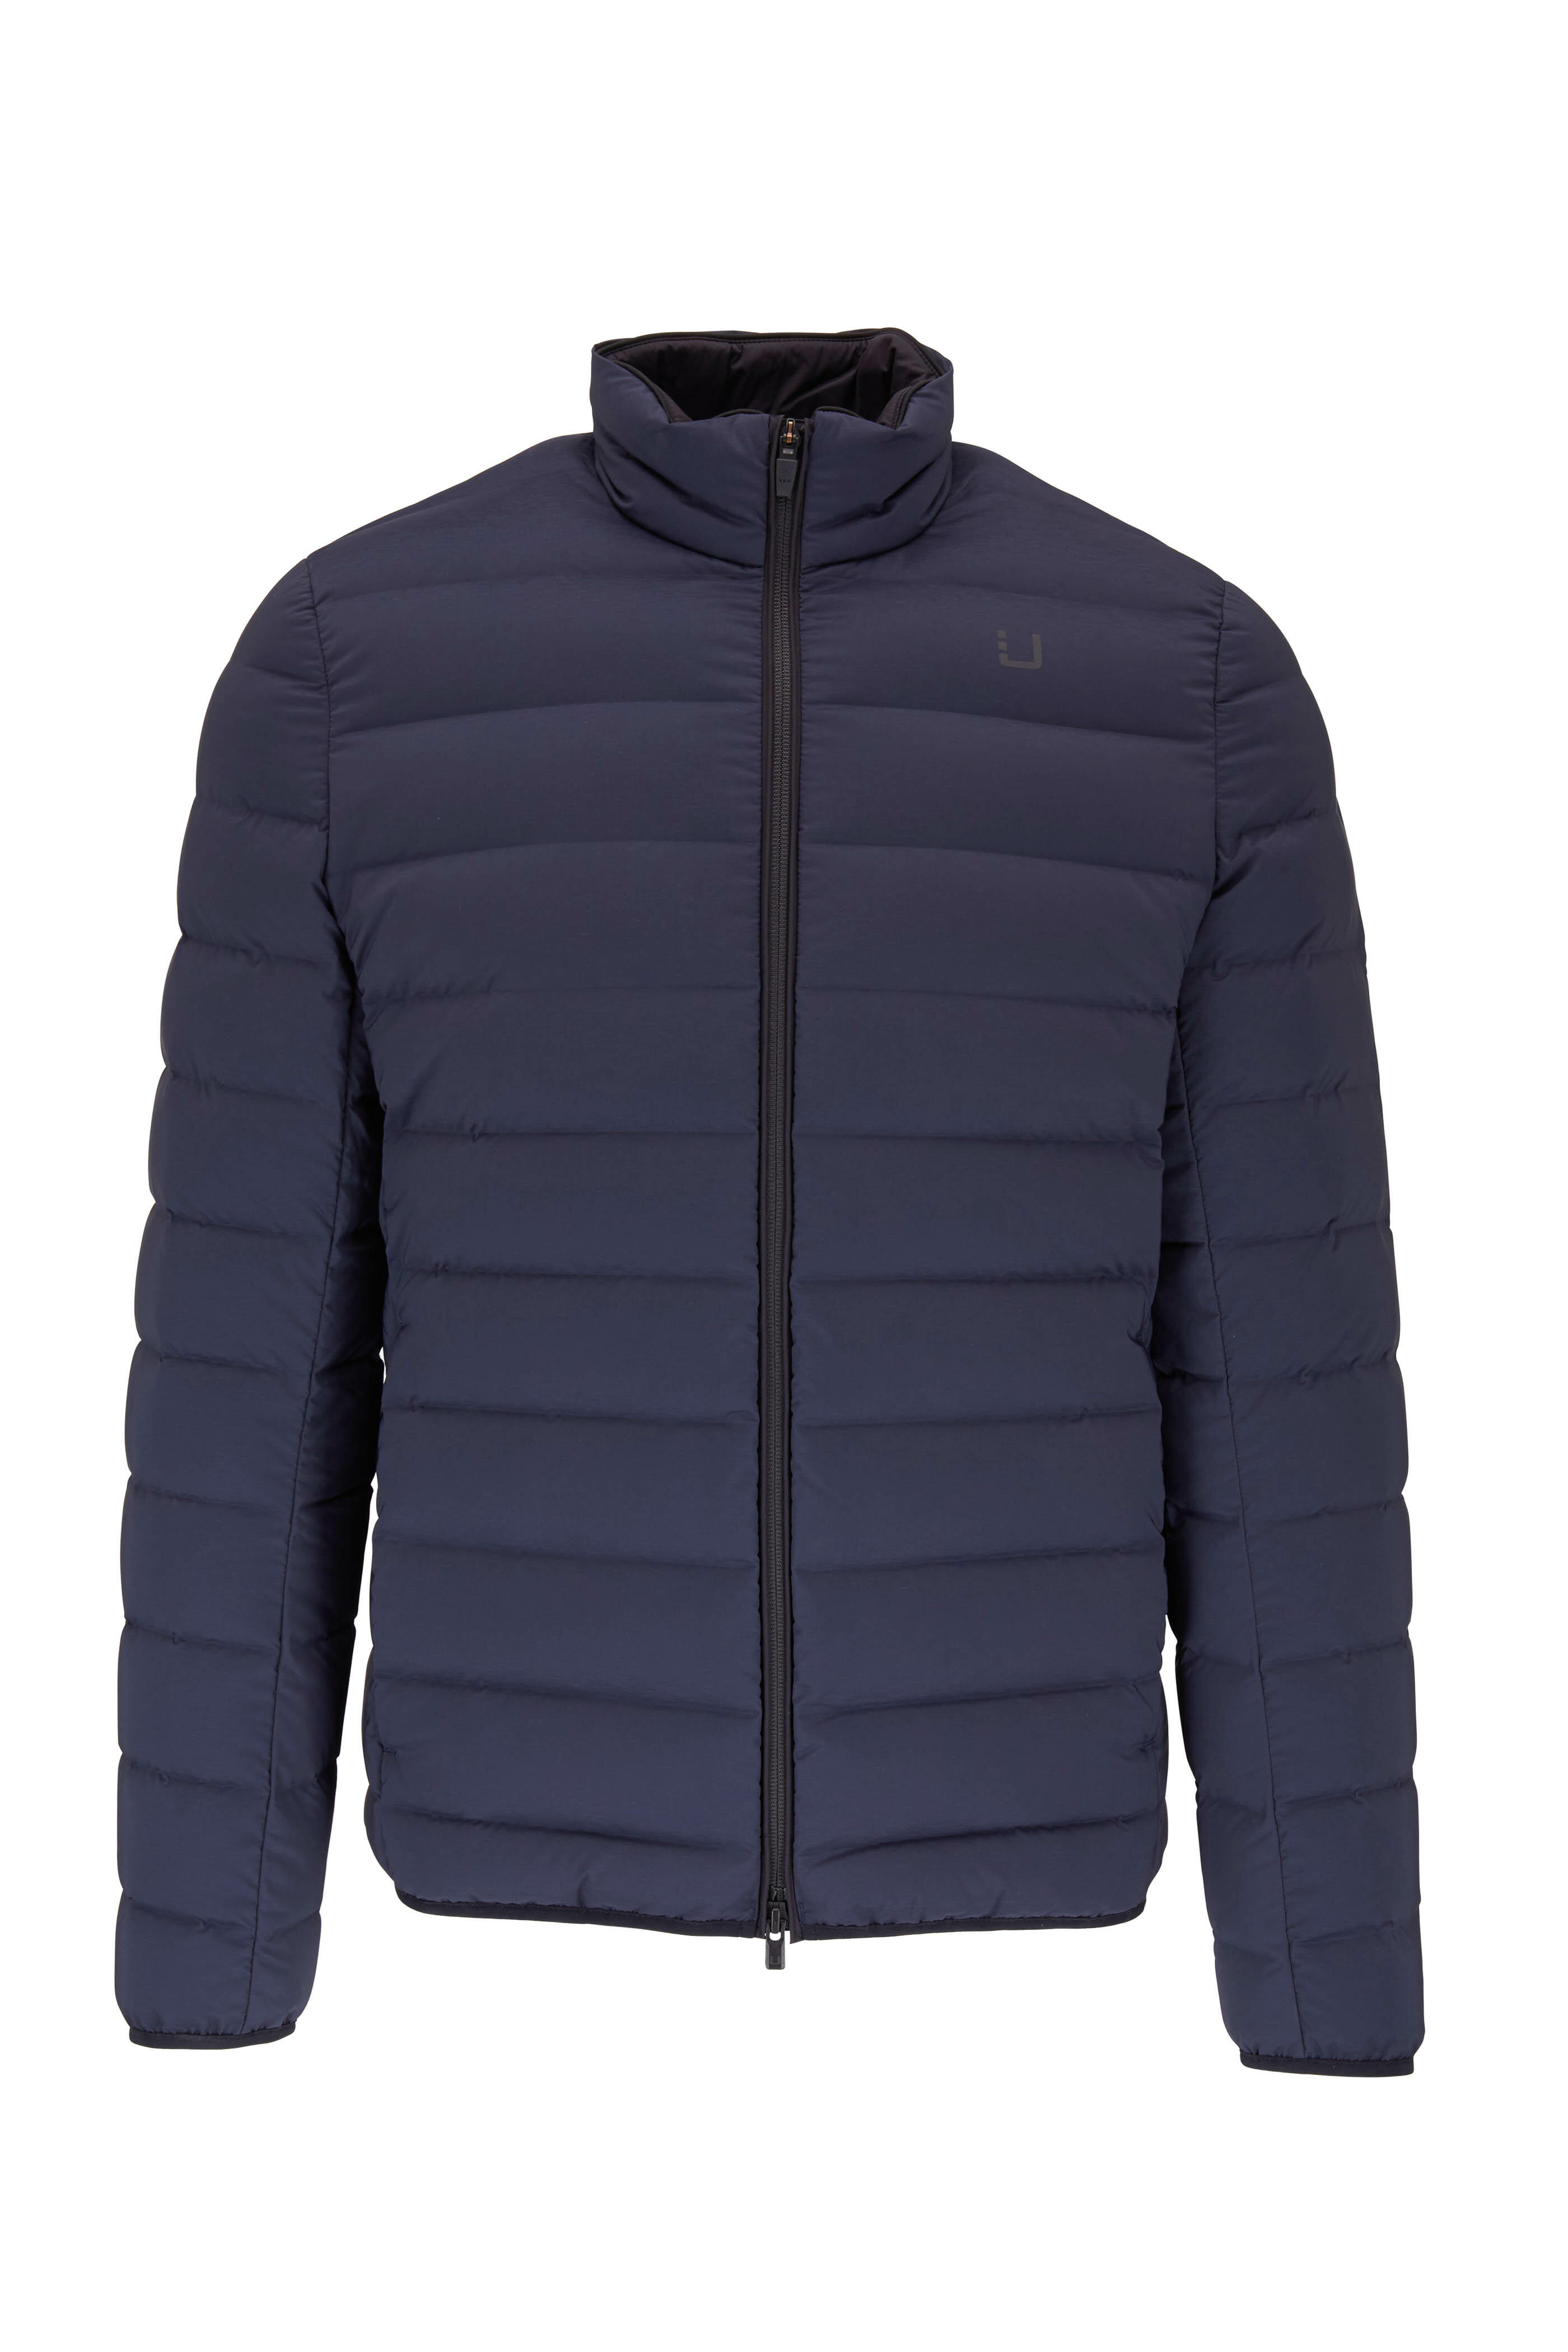 UBR - Sonic Navy Quilted Down Jacket | Mitchell Stores